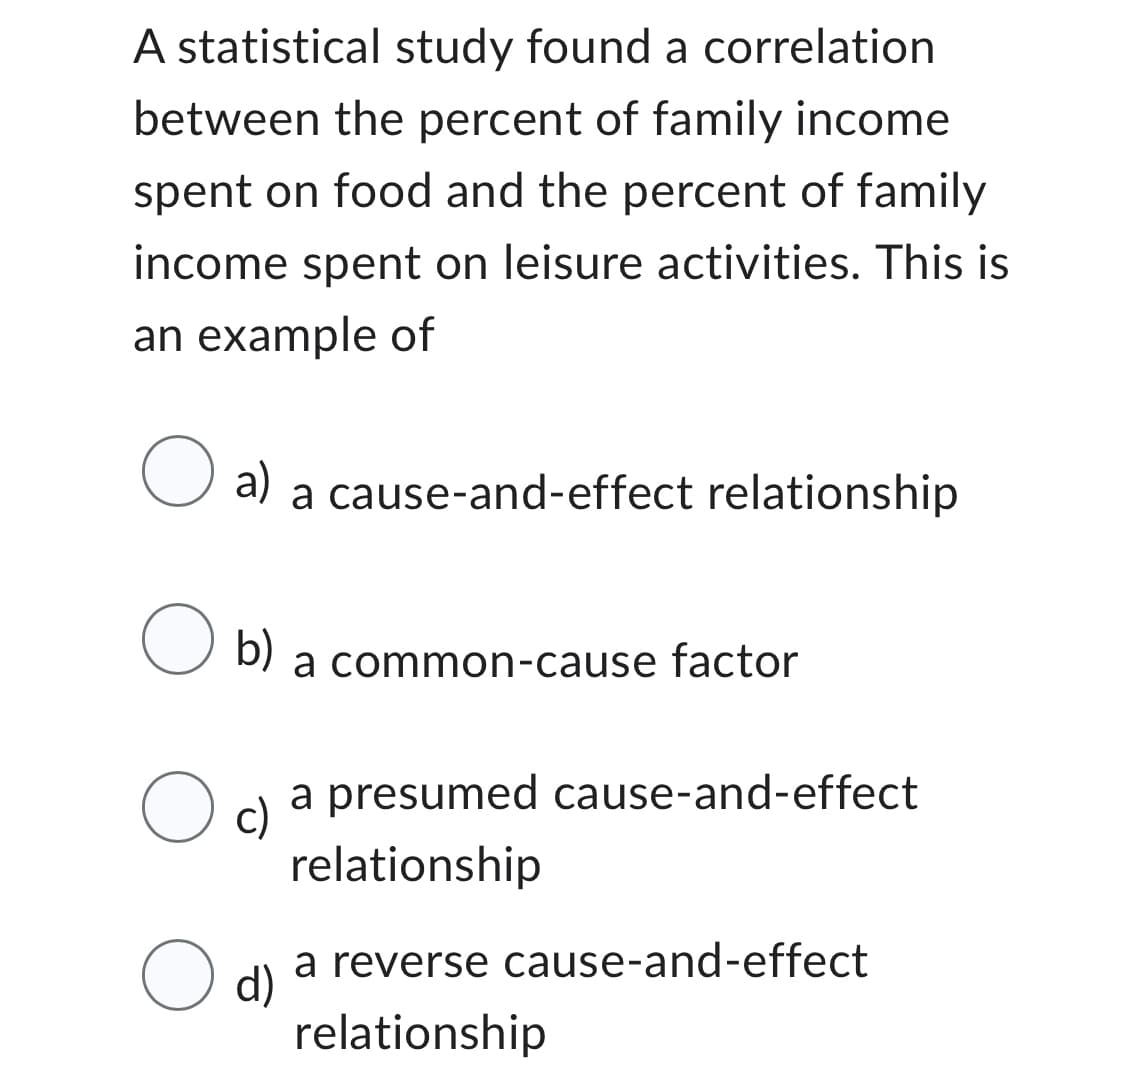 A statistical study found a correlation
between the percent of family income
spent on food and the percent of family
income spent on leisure activities. This is
an example of
O a) a cause-and-effect relationship
O b)
a common-cause factor
a presumed cause-and-effect
relationship
a reverse cause-and-effect
relationship
Oc)
O d)